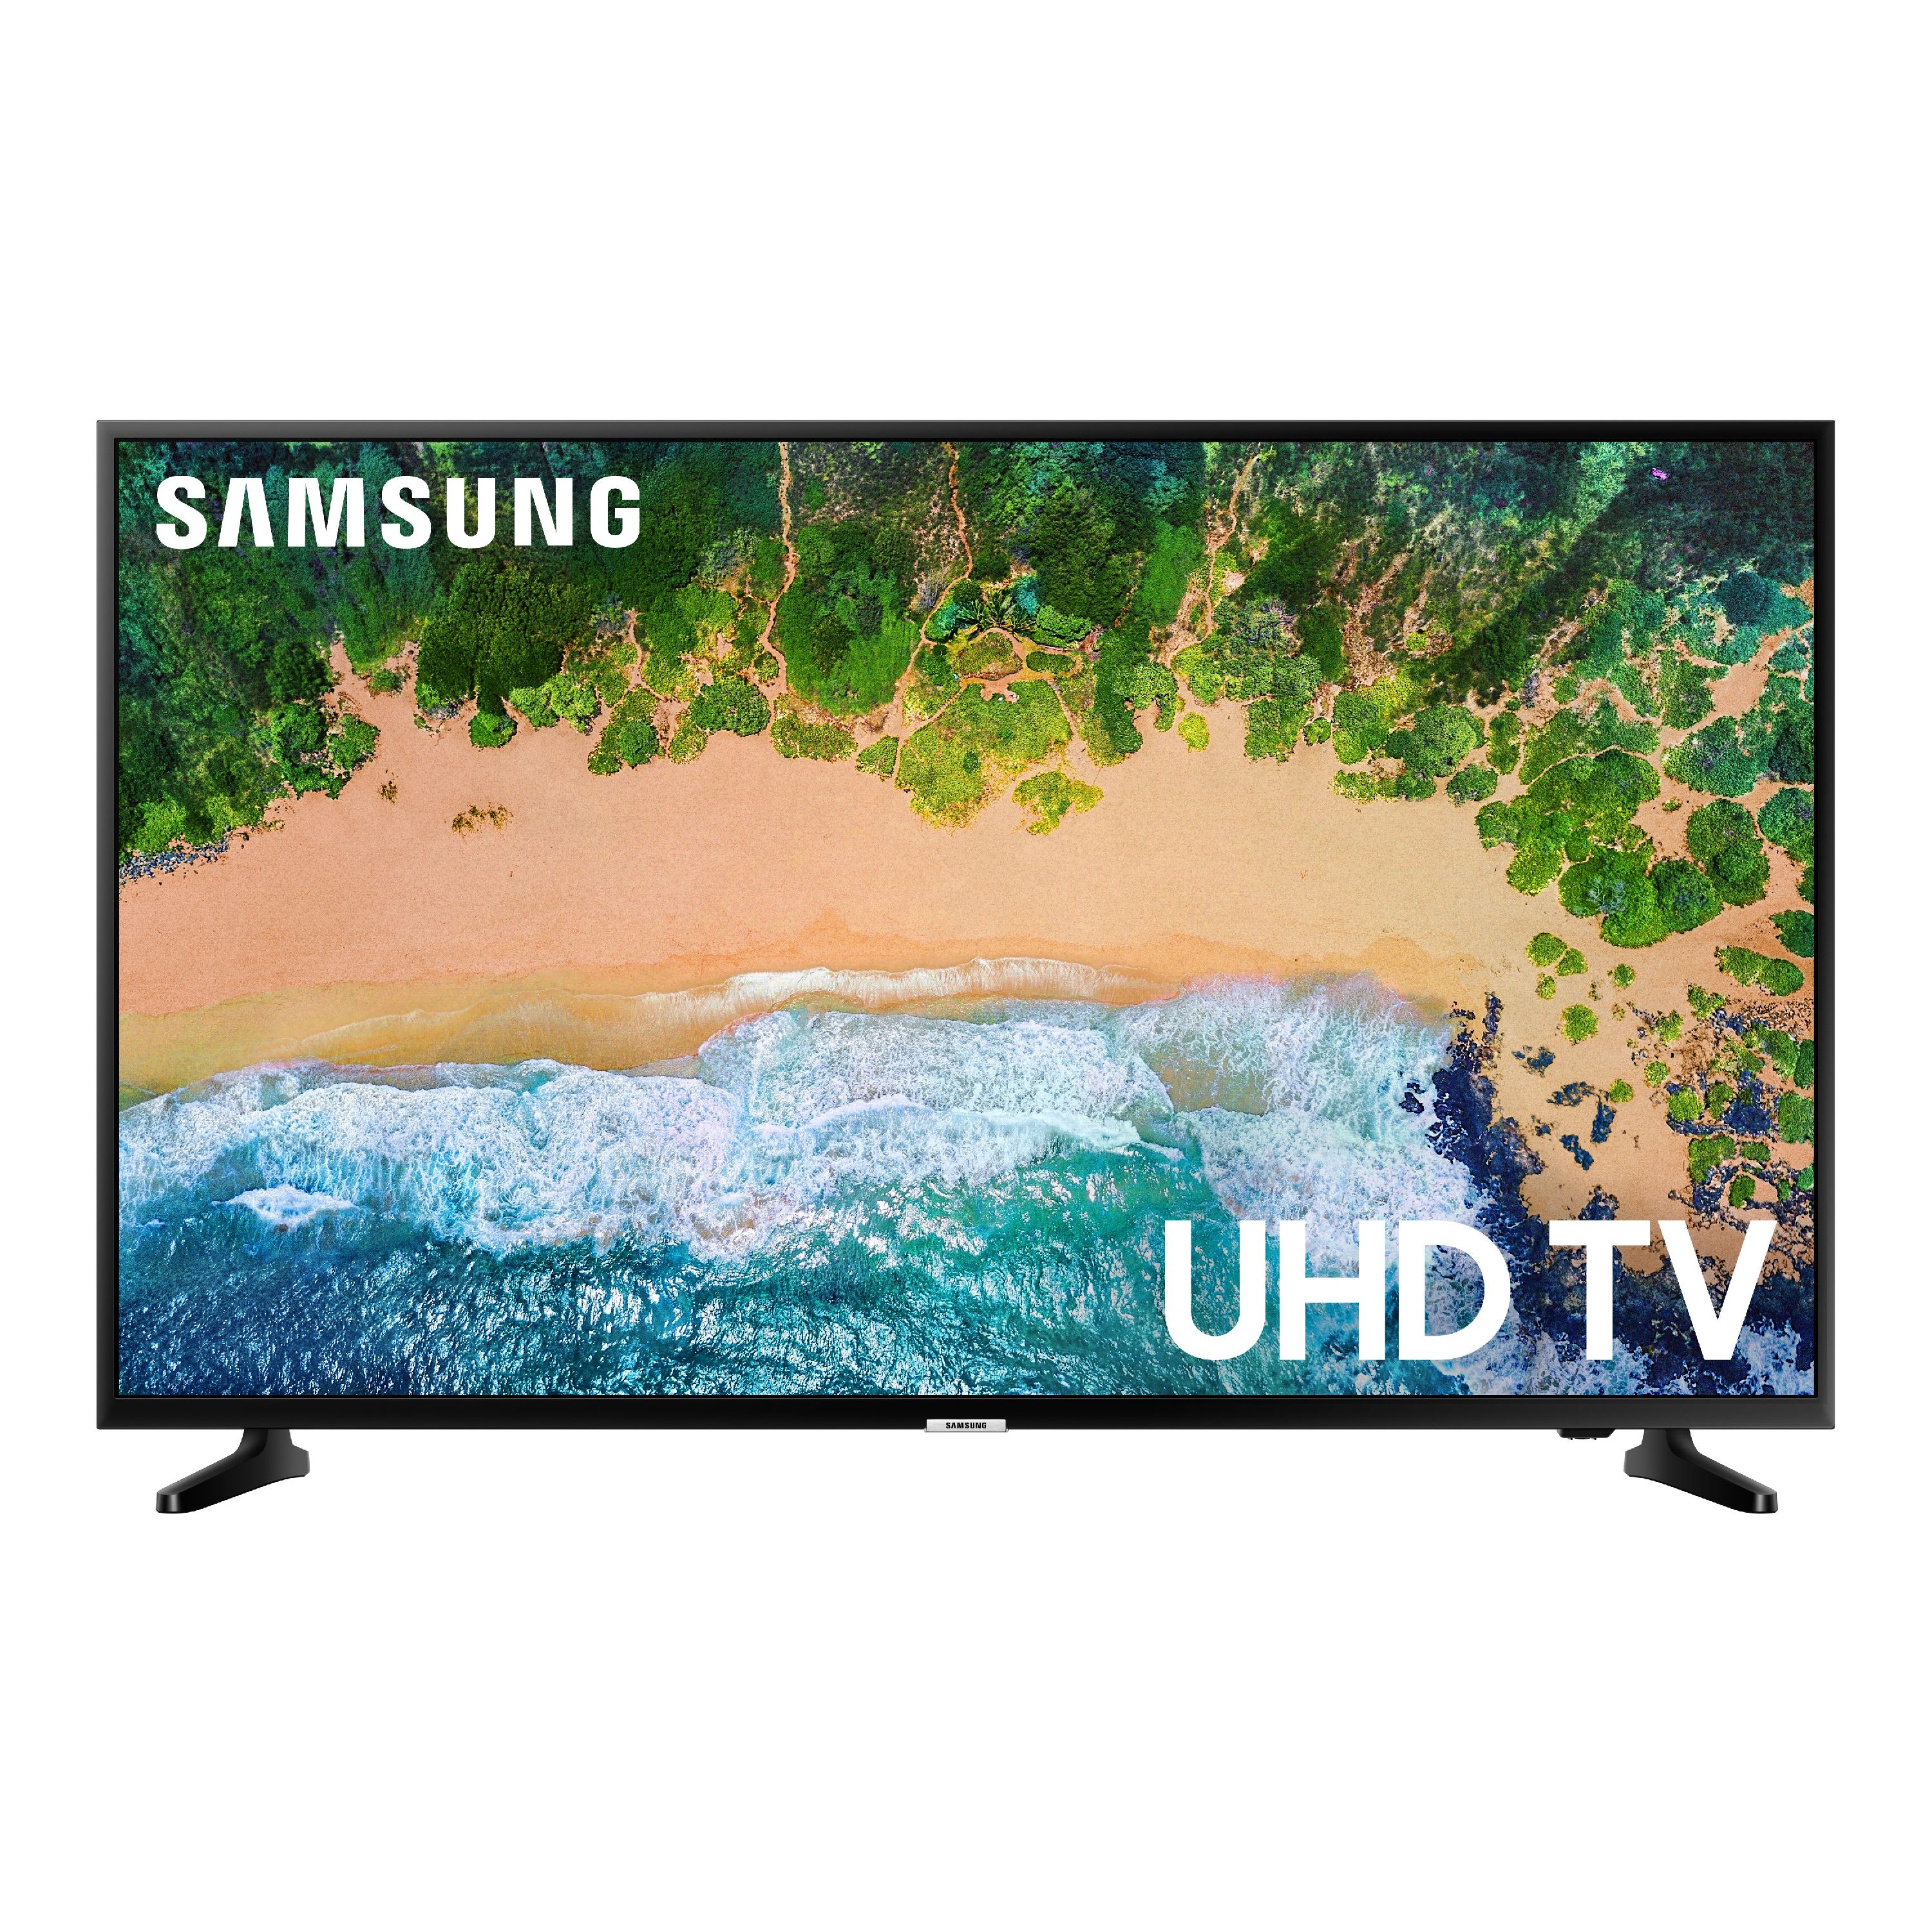 SAMSUNG 55" Class 4K UHD 2160p LED Smart TV with HDR UN55NU6900 - image 23 of 23